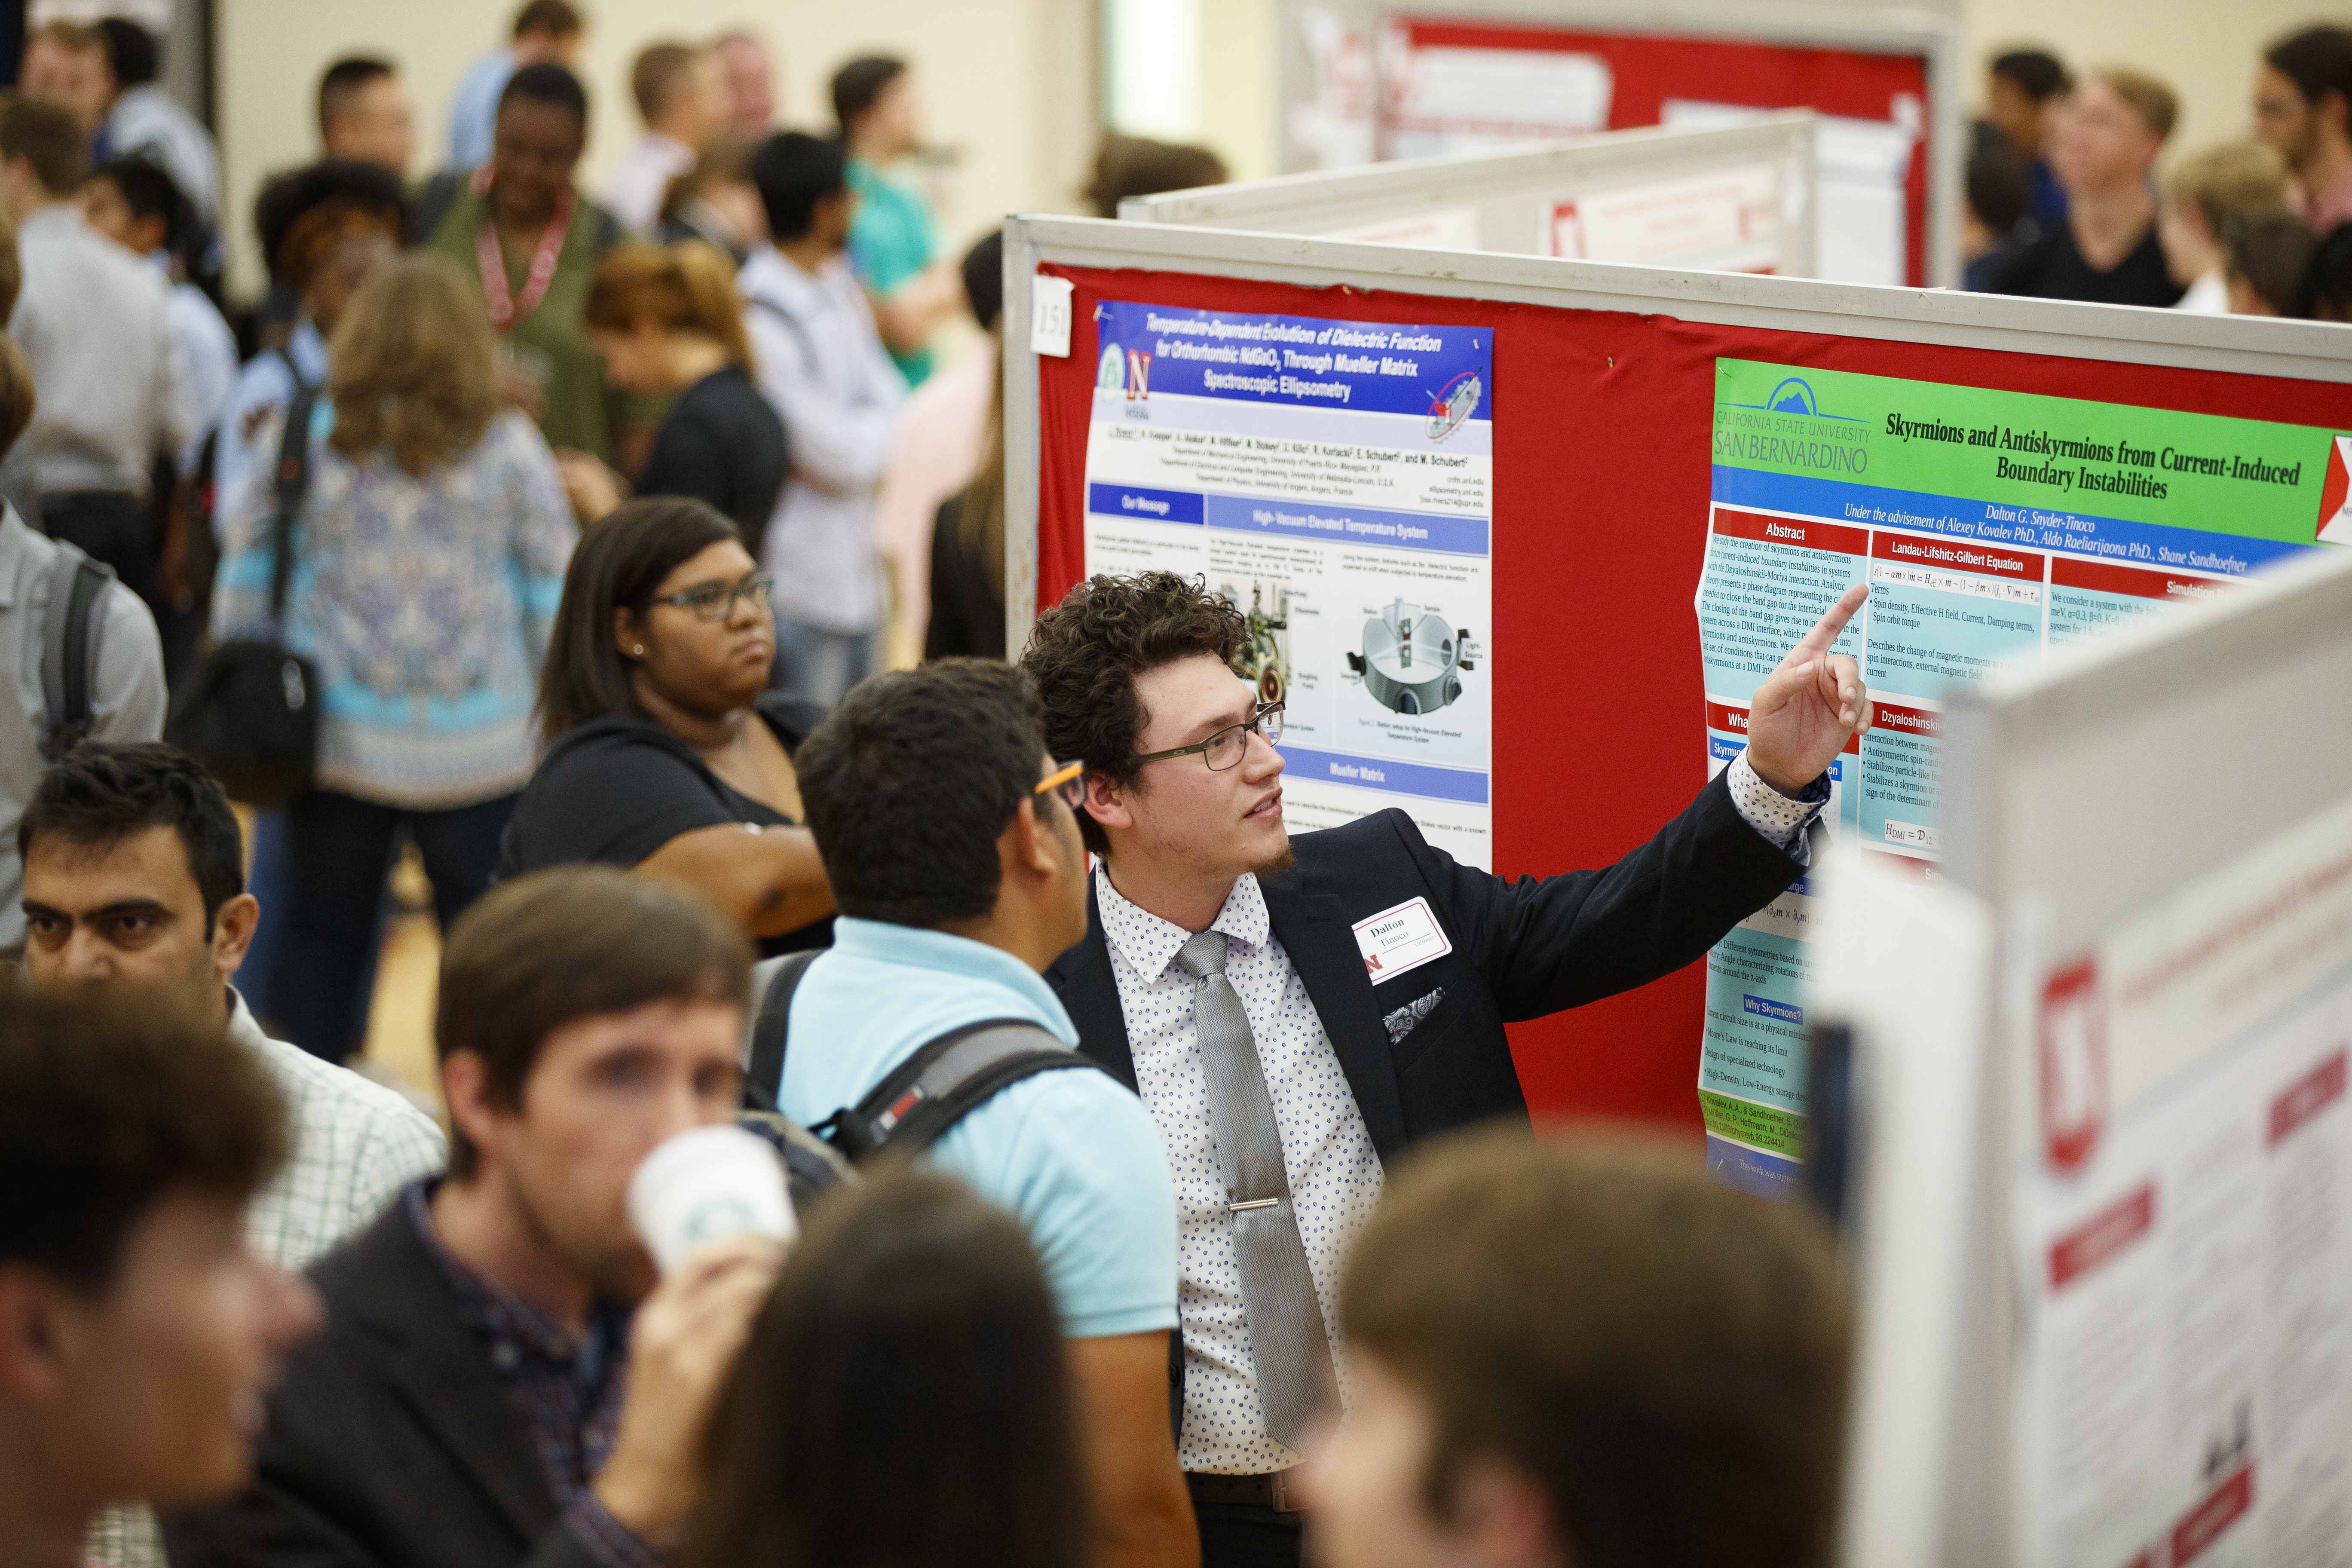 Students presenting their research at the 2019 Nebraska Summer Research Symposium